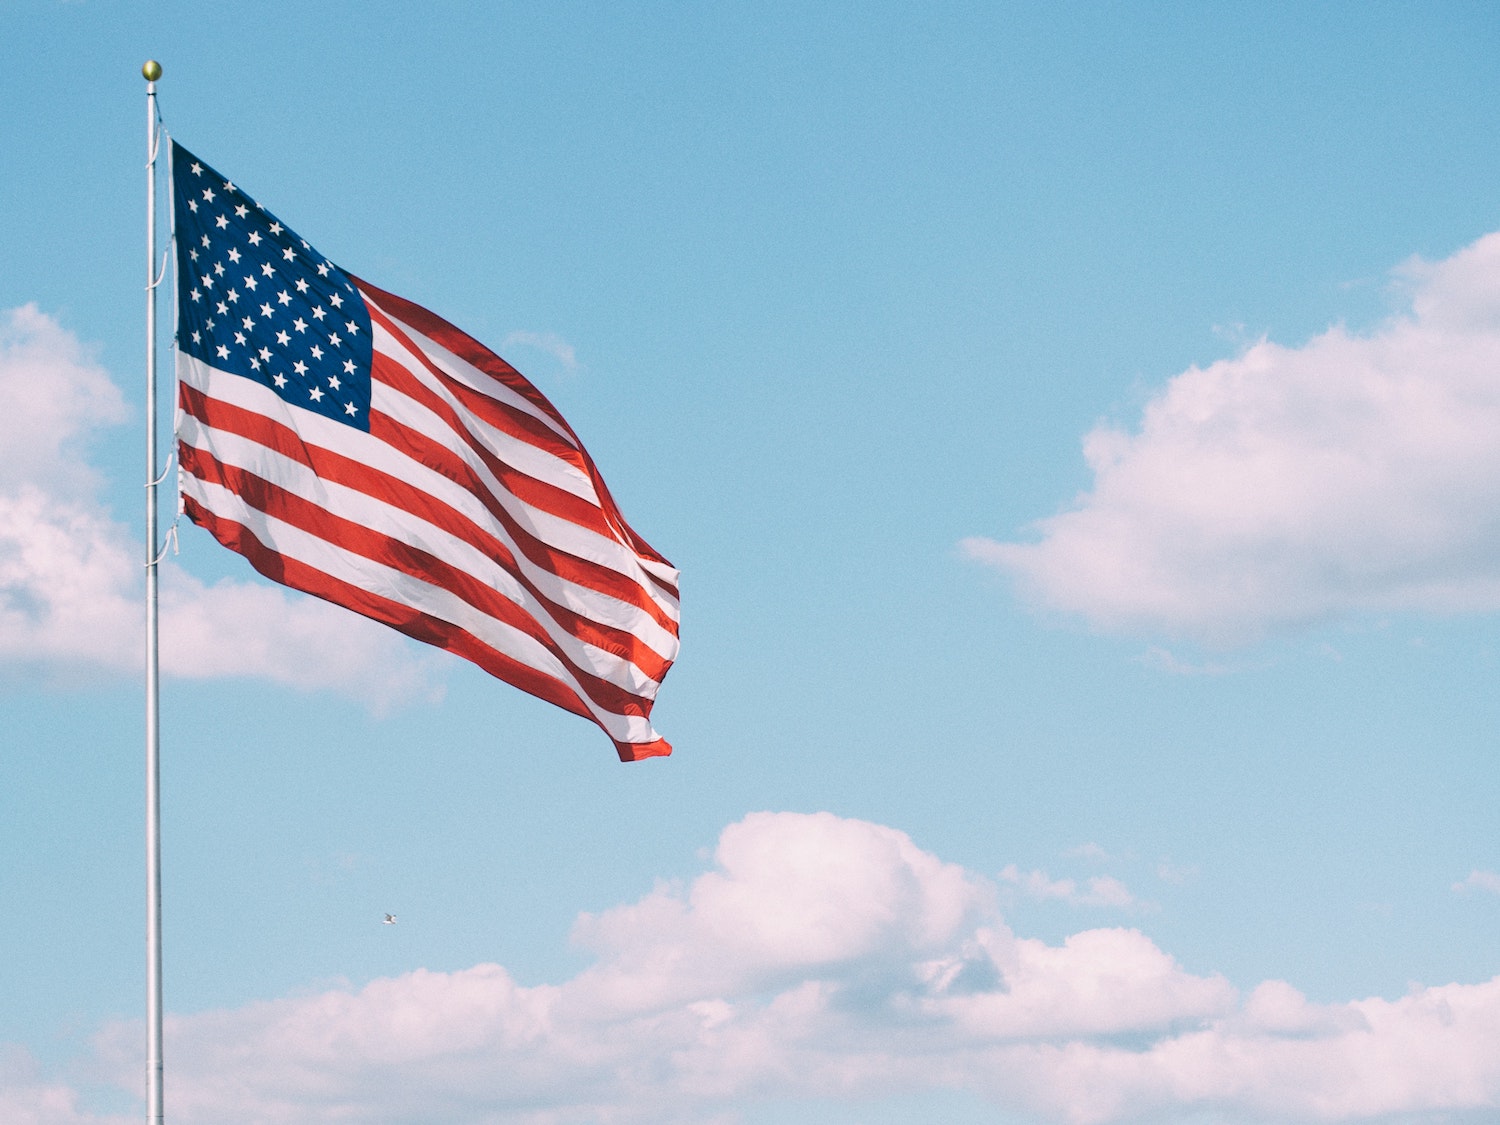 A large American flag blowing in the breeze in front of a light blue sky and fluffy white clouds.